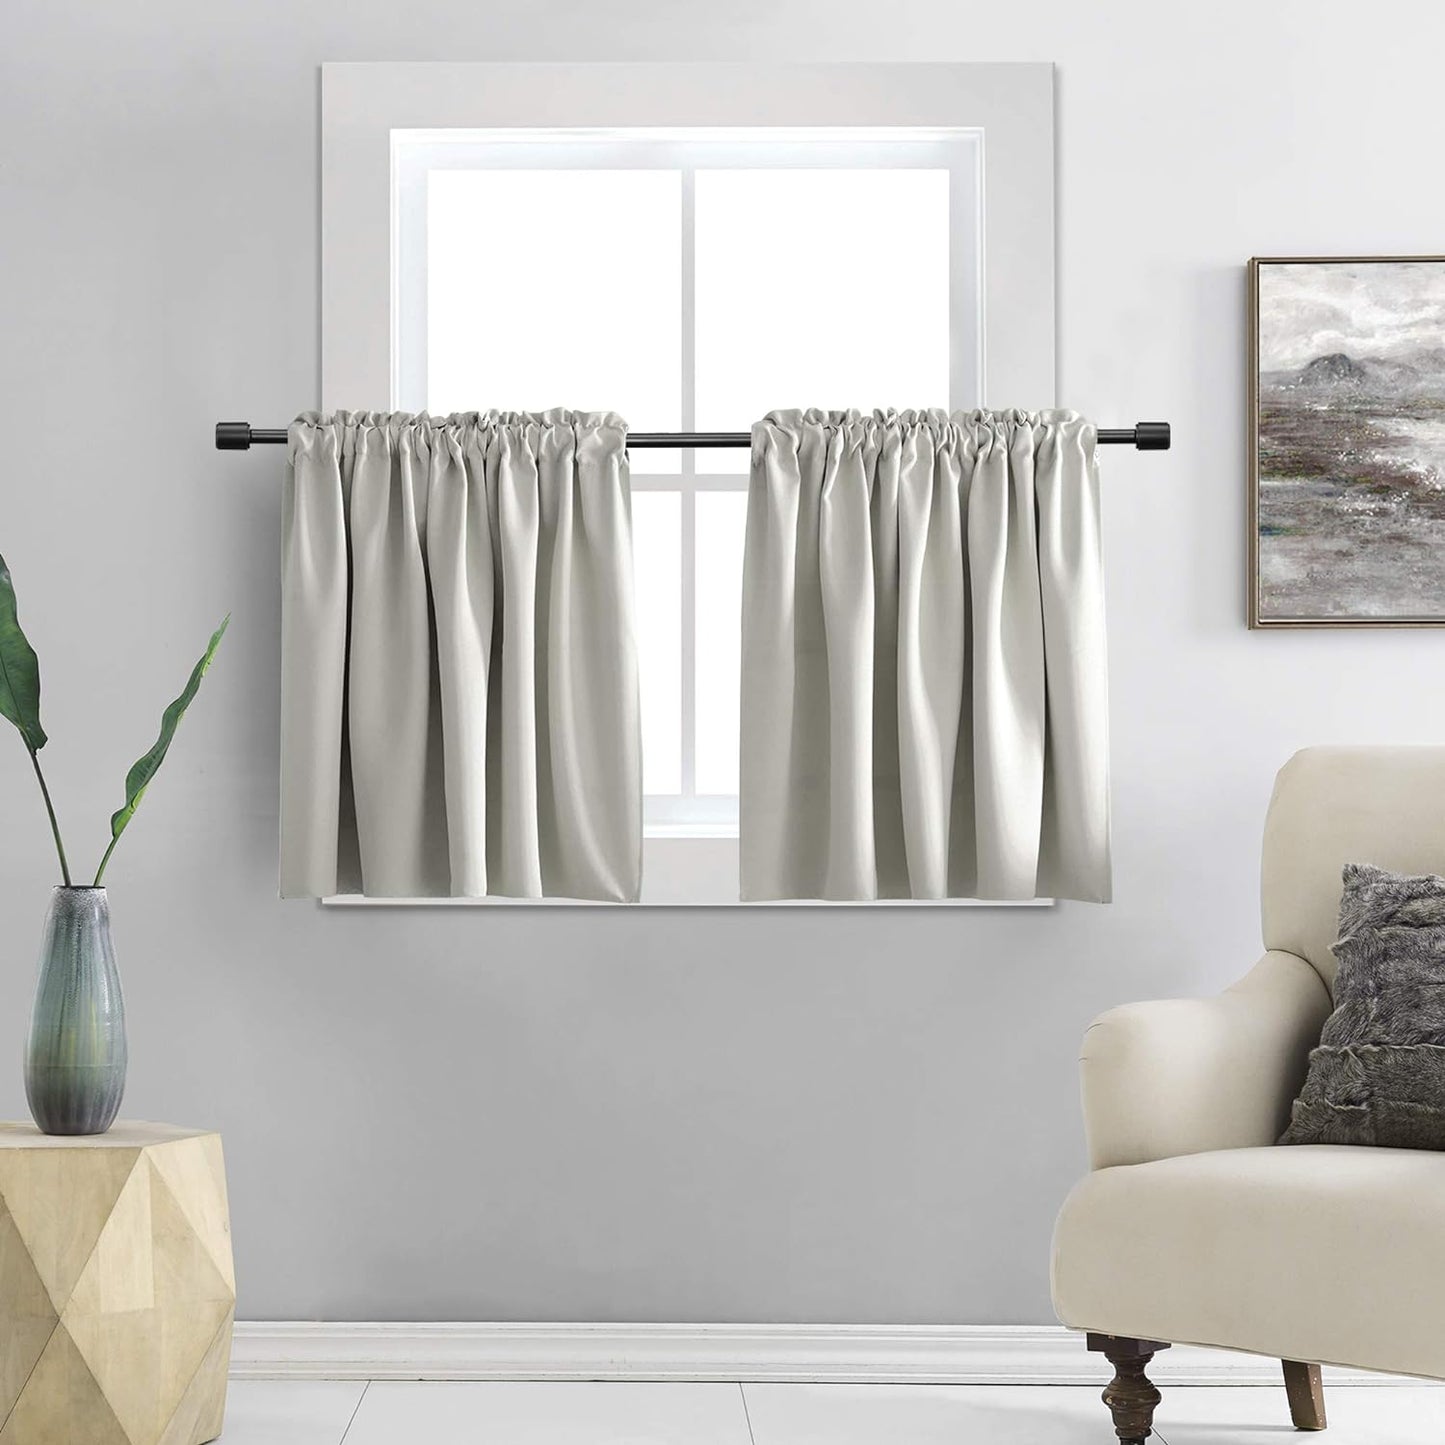 DONREN 24 Inch Length Curtains- 2 Panels Blackout Thermal Insulating Small Curtain Tiers for Bathroom with Rod Pocket (Black,42 Inch Width)  DONREN Light Grey 42" X 24" 